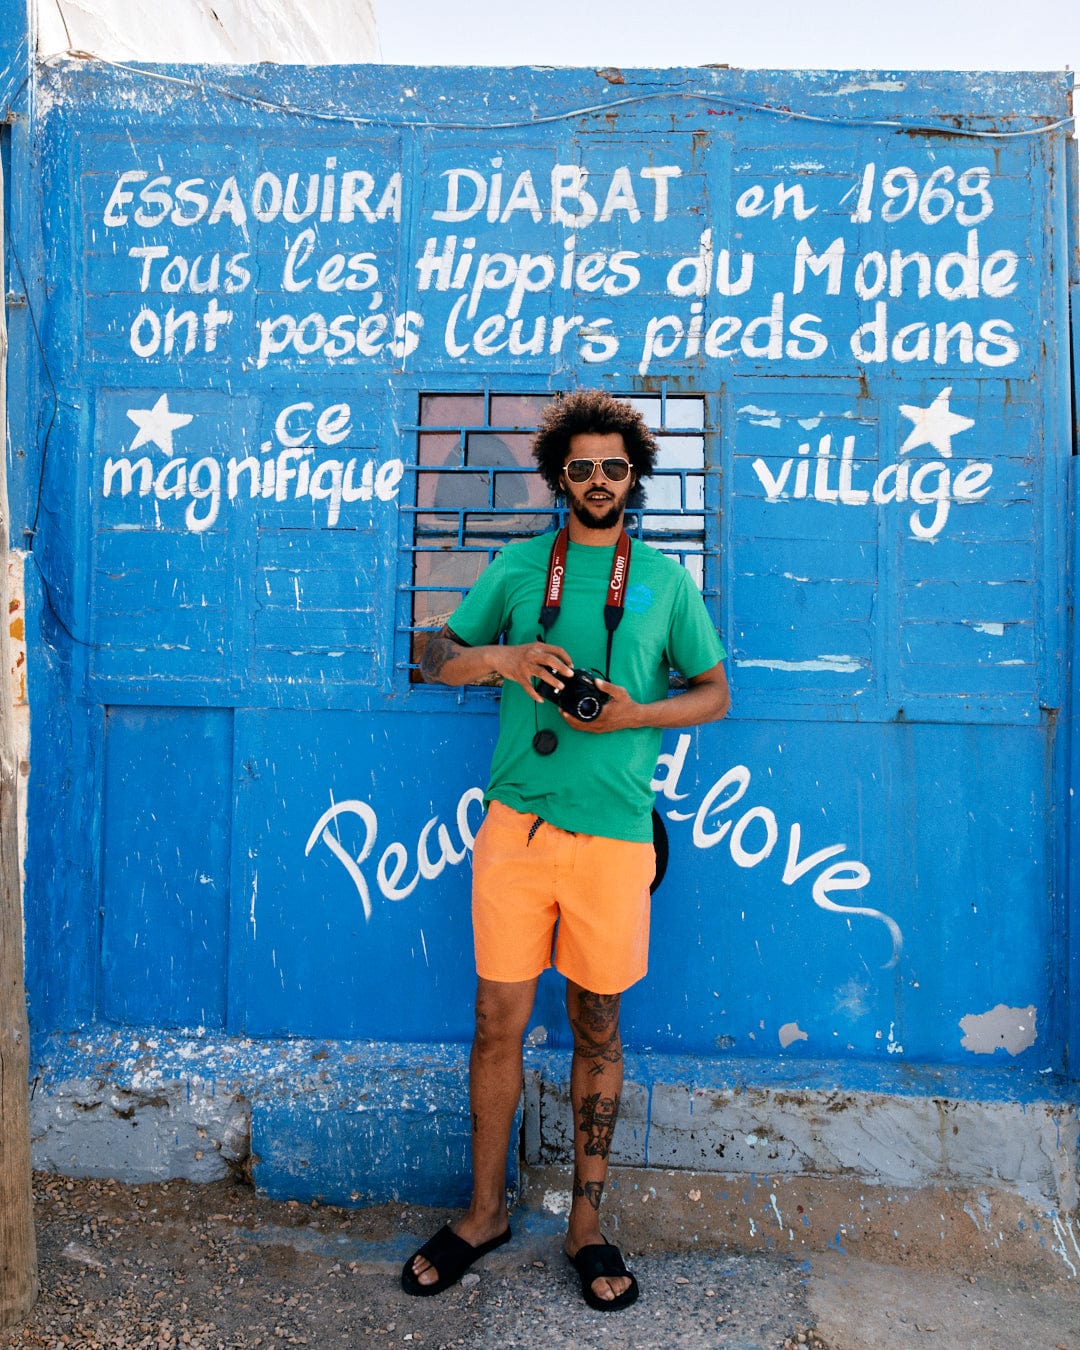 A man with a camera stands in front of a blue wall with French text about hippies in Essaouira Diabat, 1968. The wall, much like the Saltrock Geo Palms Solid - Mens Recycled Hybrid T-Shirt - Green, is adorned with the phrases 